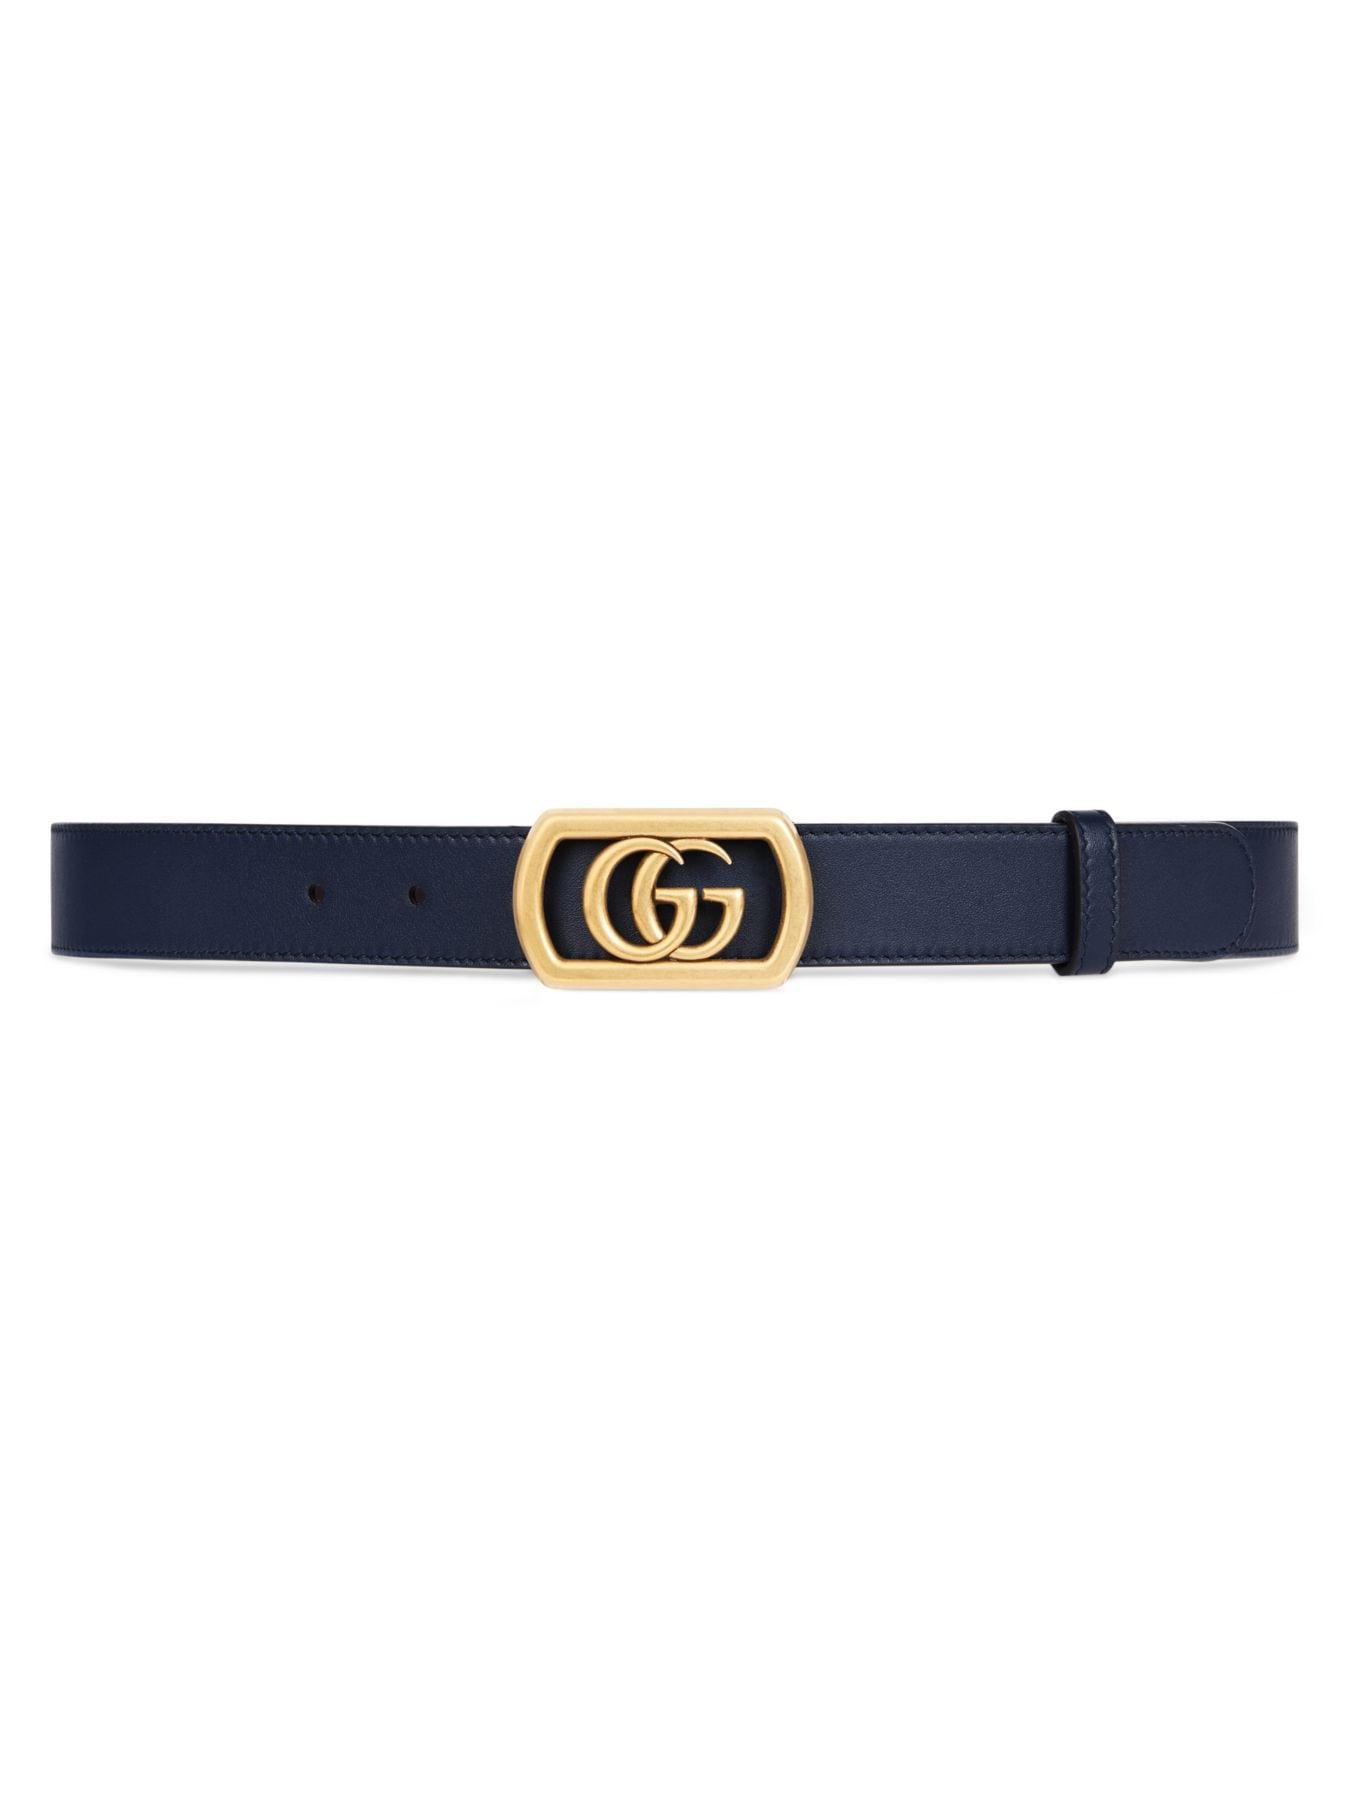 Gucci New Marmont Leather Belt in Blue for Men - Lyst